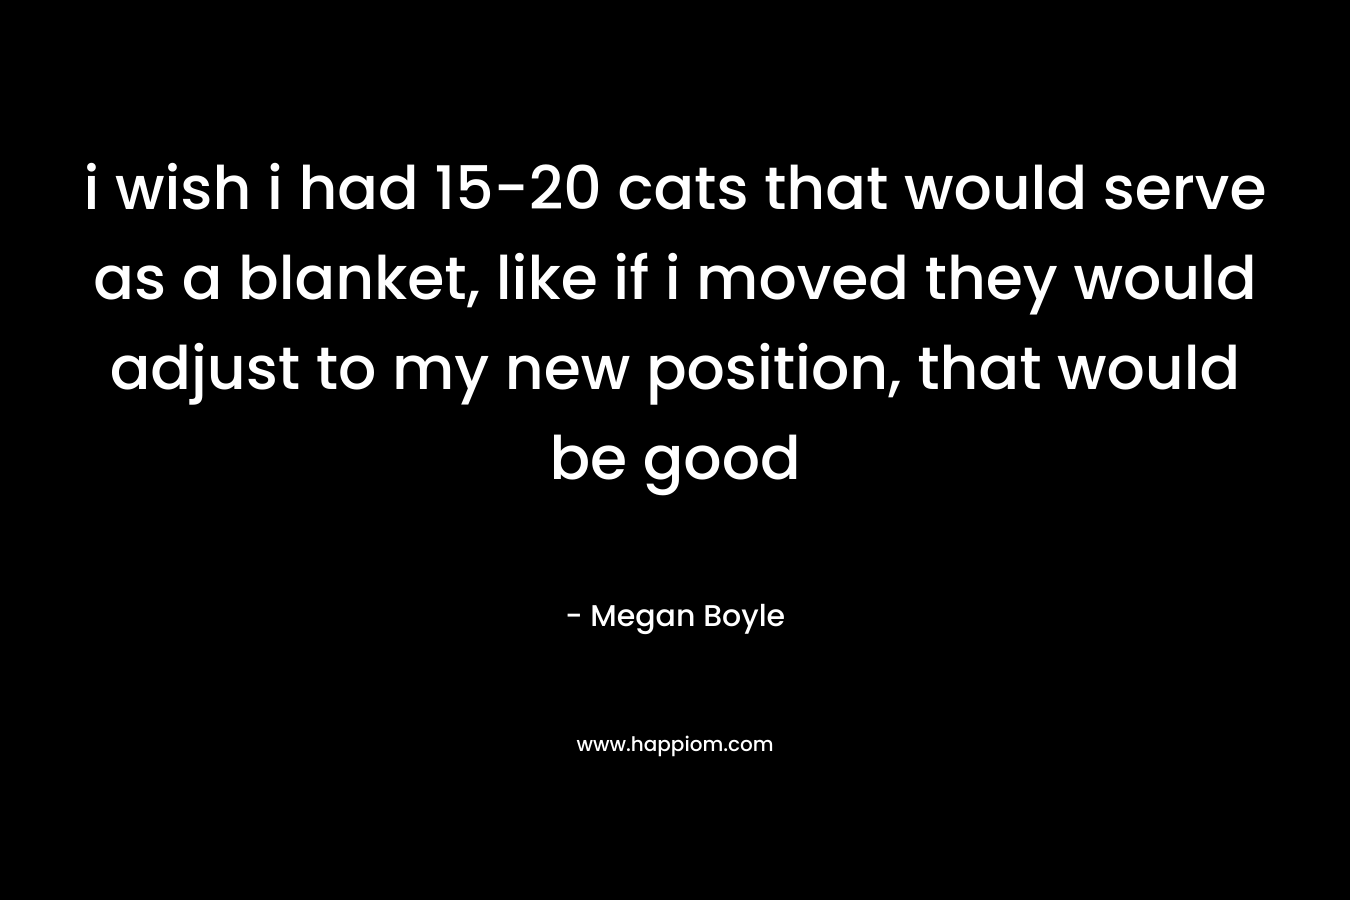 i wish i had 15-20 cats that would serve as a blanket, like if i moved they would adjust to my new position, that would be good – Megan Boyle